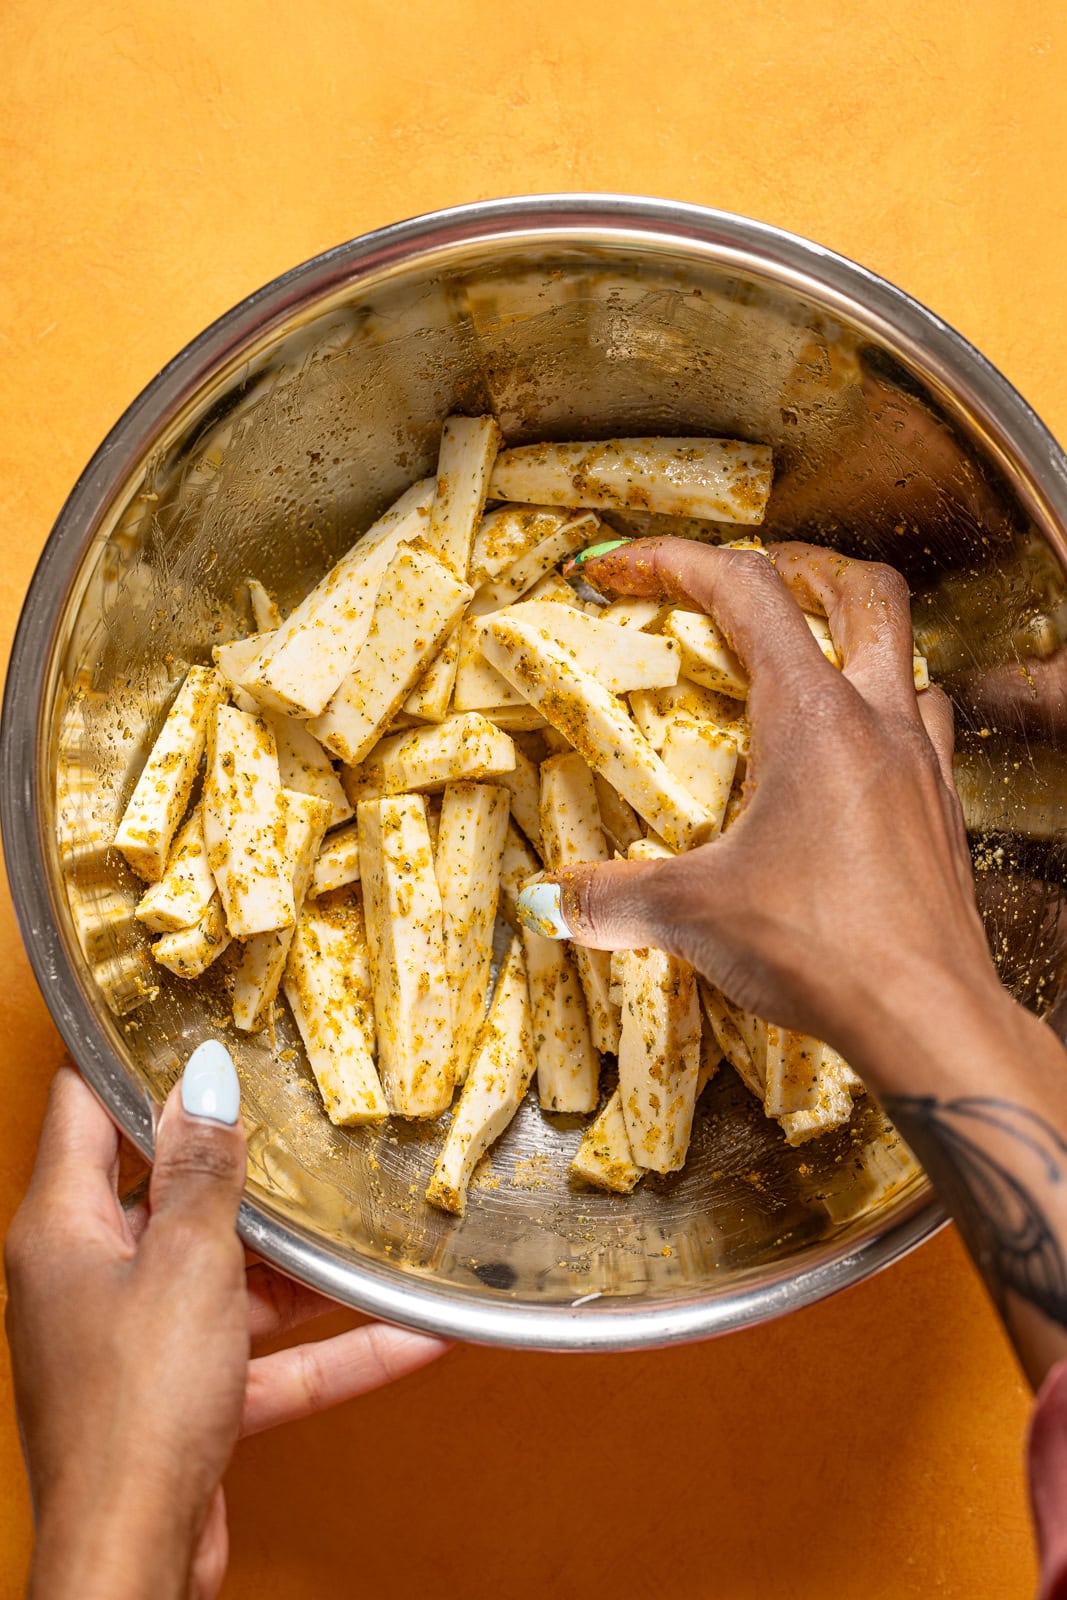 Fries being seasoned in a silver bowl.